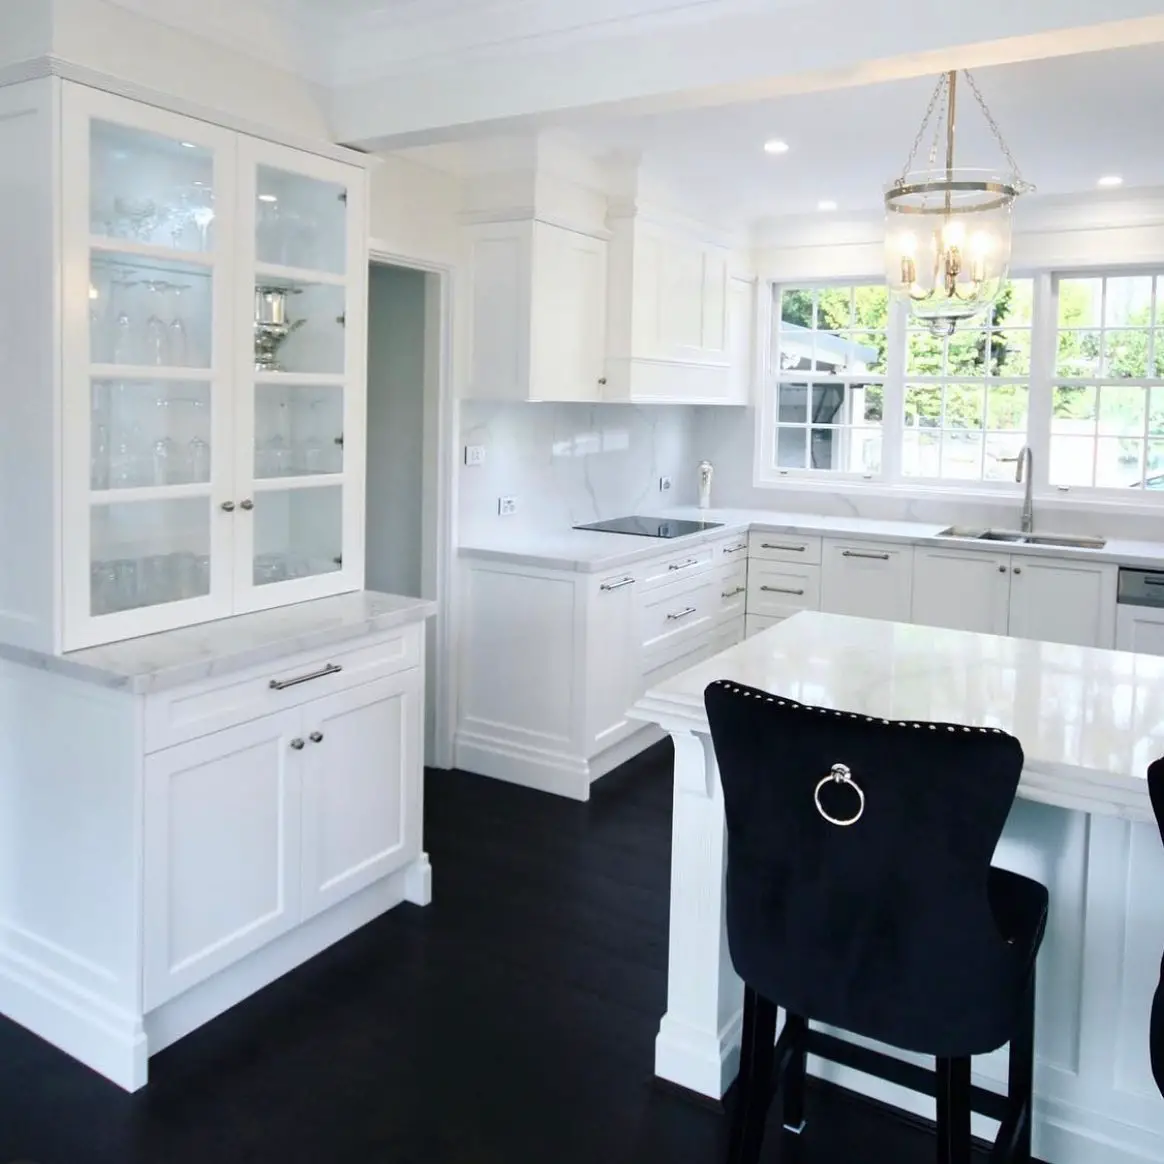 A white kitchen with black counter tops.